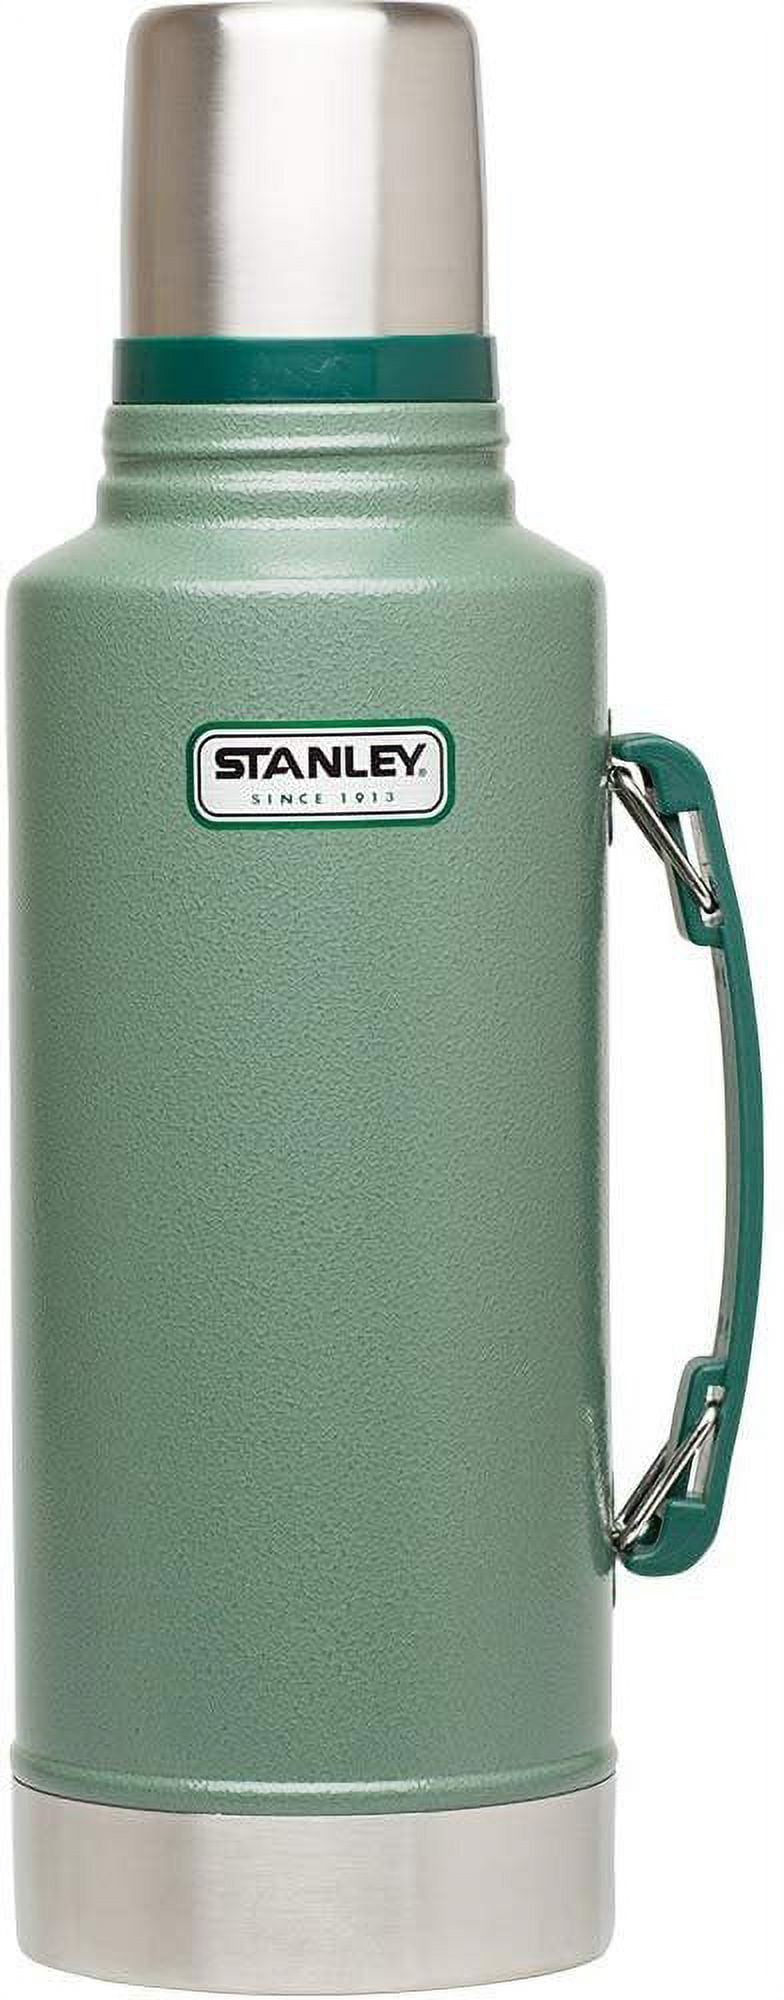 Stanley Classic Legendary Vacuum Insulated Food Jar 18 oz – Stainless  Steel, Naturally BPA-free Container – Keeps Food/Liquid Hot or Cold for 12  Hours